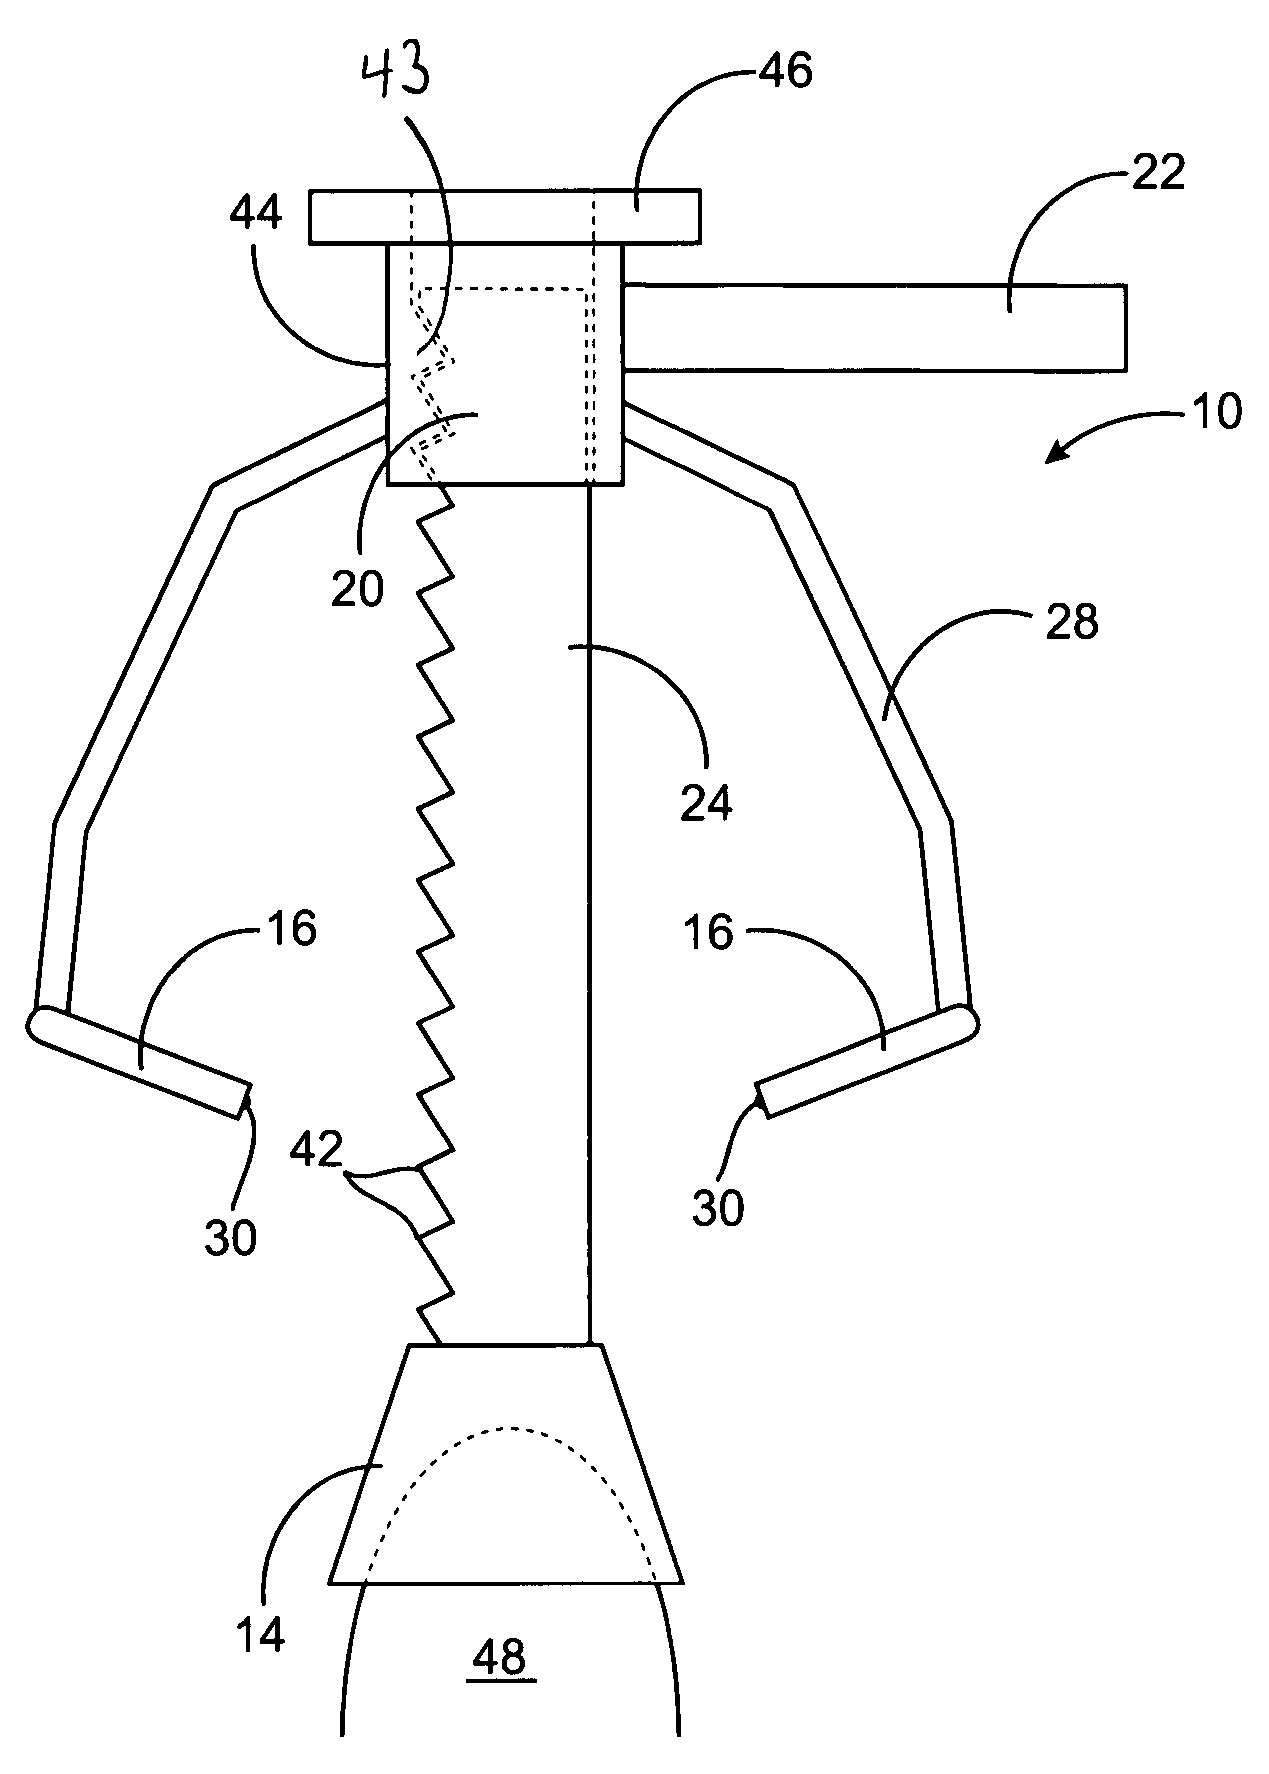 Clamp for performing circumcisions on newborns and a method of using the same